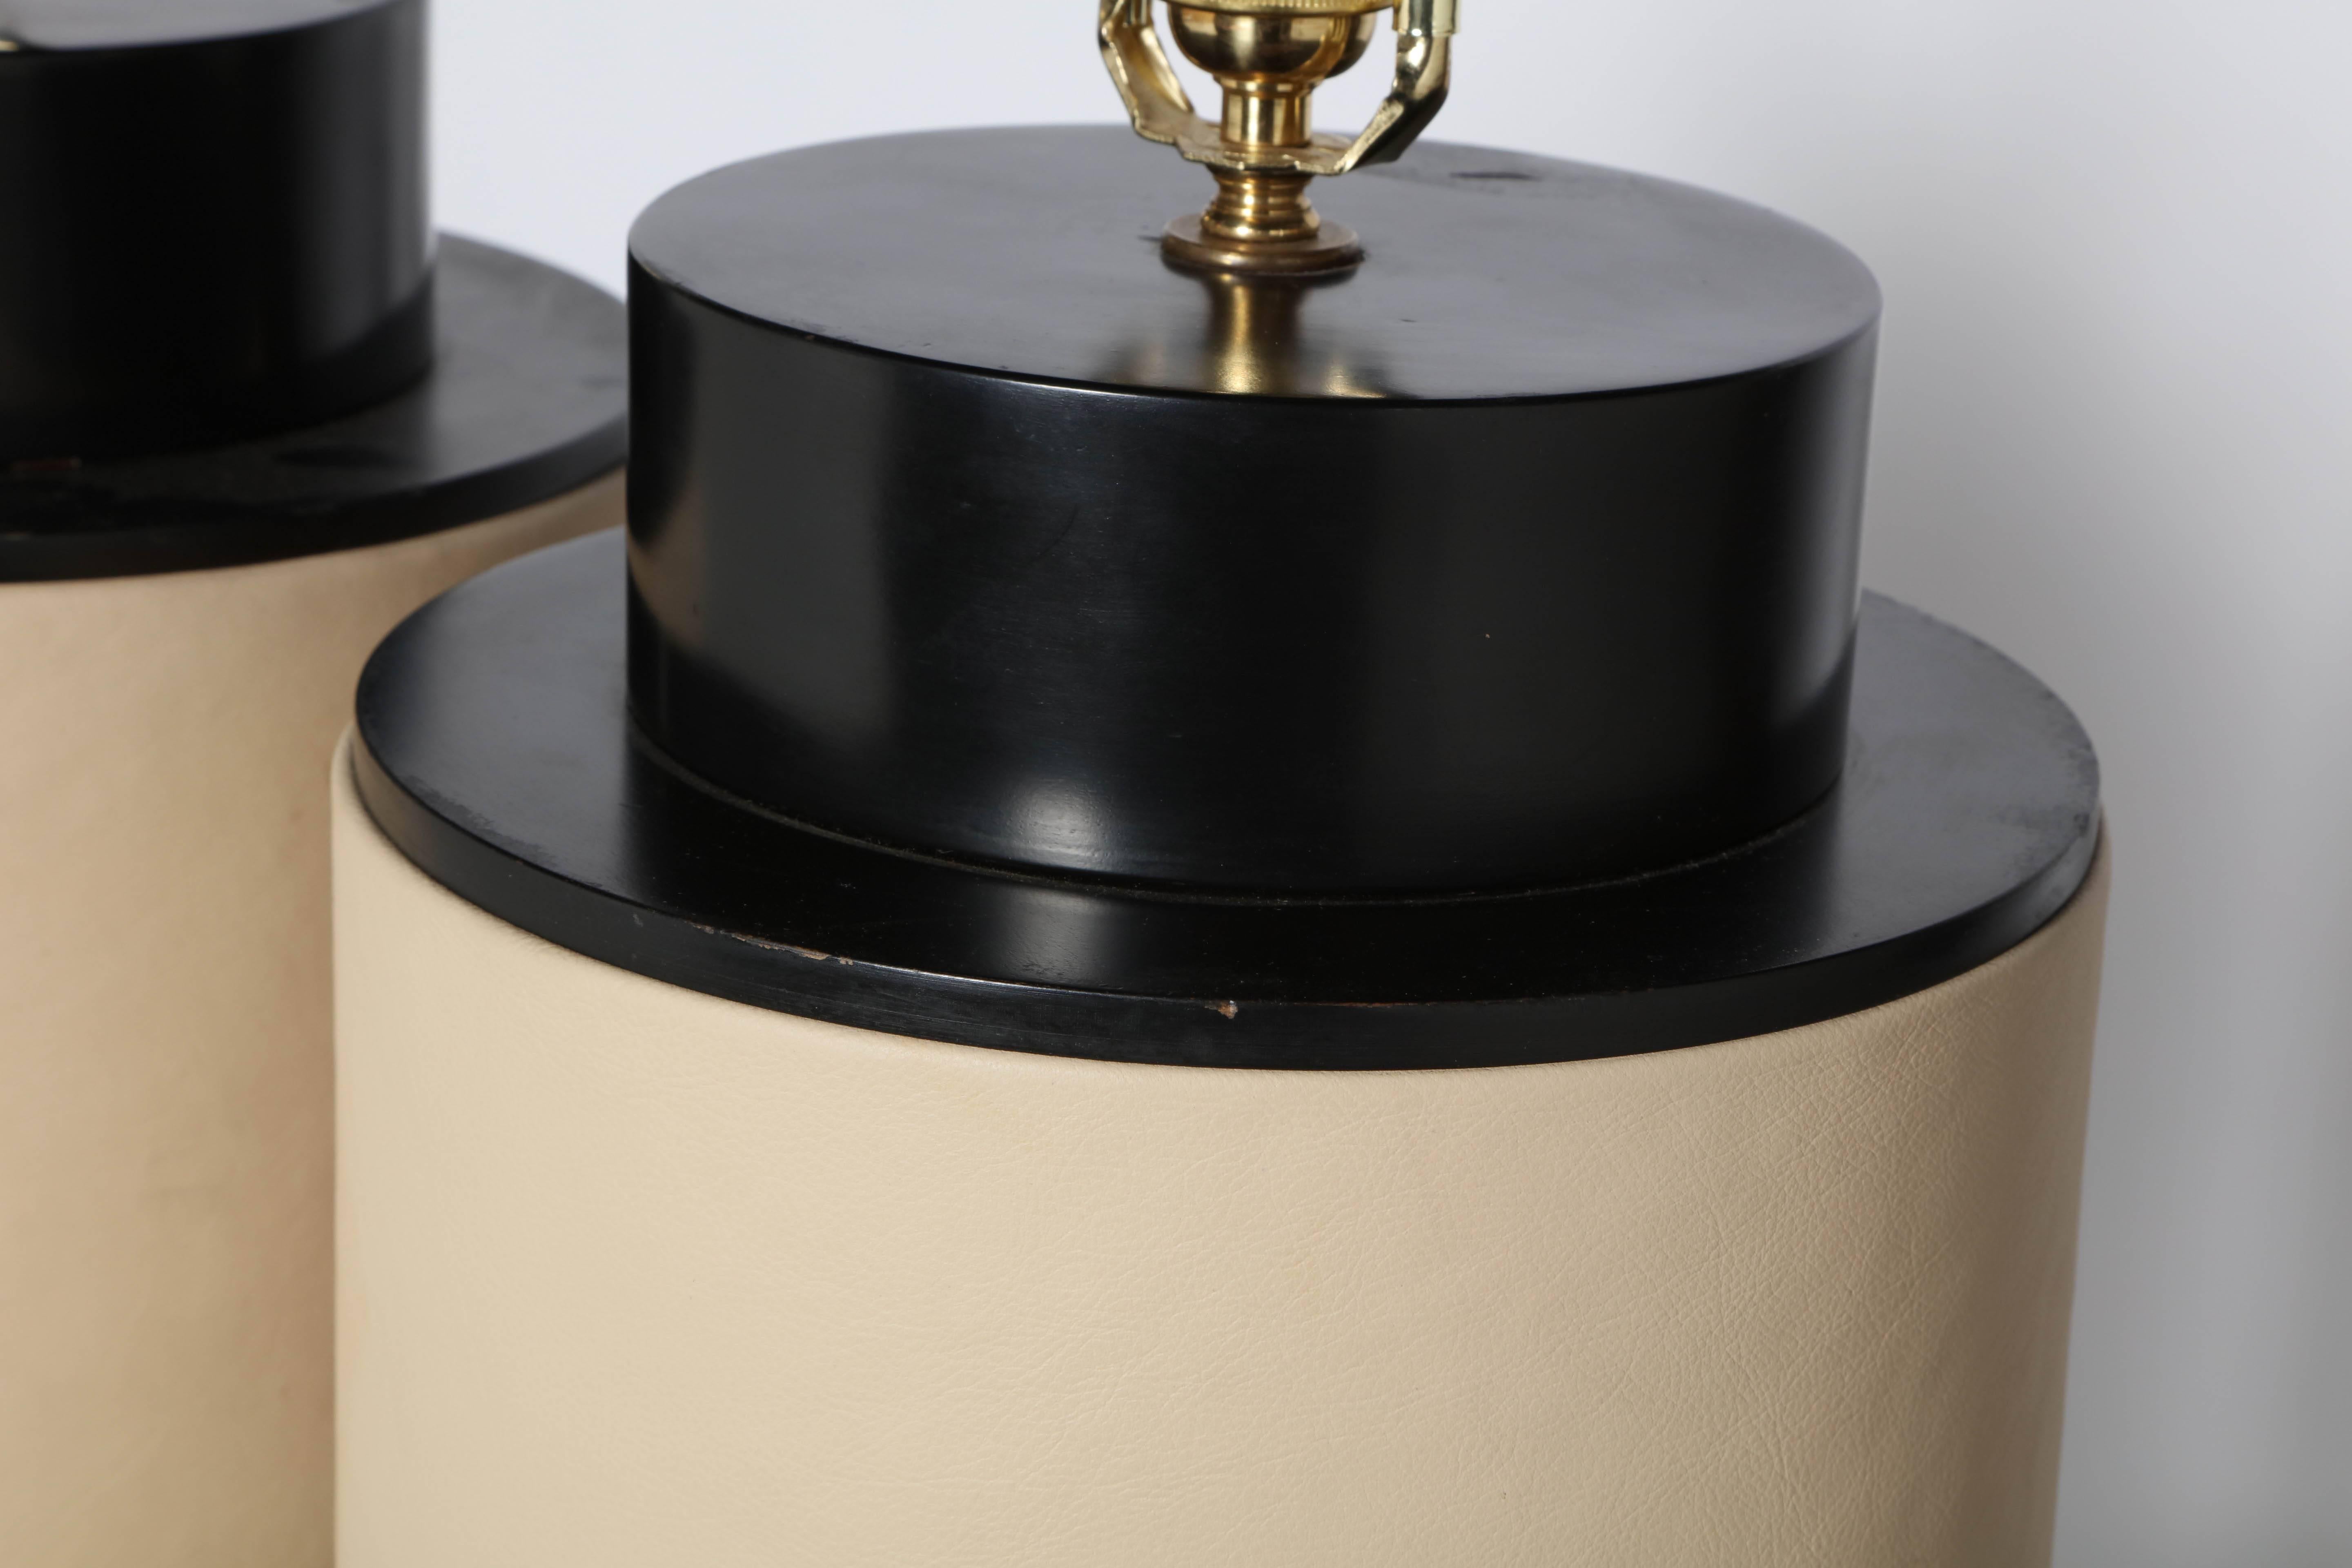 Enameled Substantial Pair of Wrapped Beige Leather & Black Enamel Barrel Table Lamps  